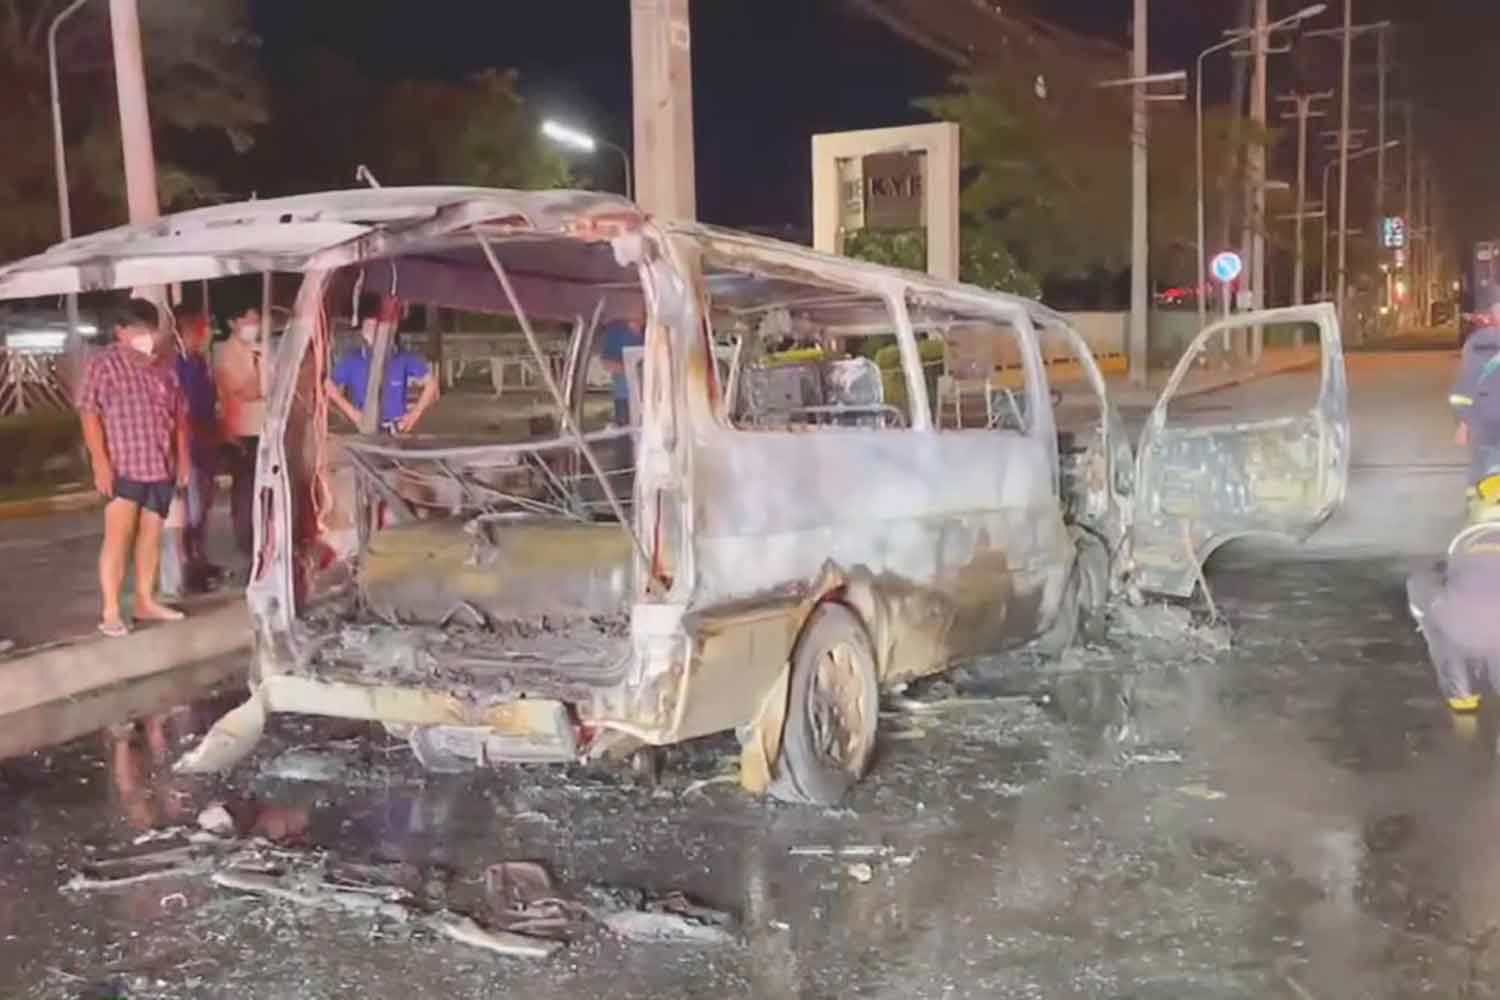 6 Escape Unharmed after Toyota Minivan Goes Up in Flames